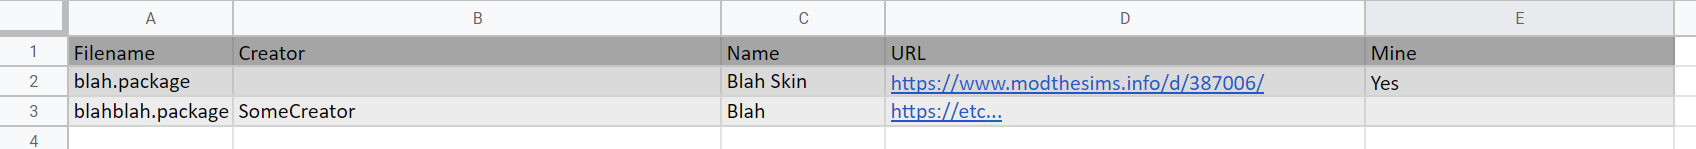 Example in Google Sheets